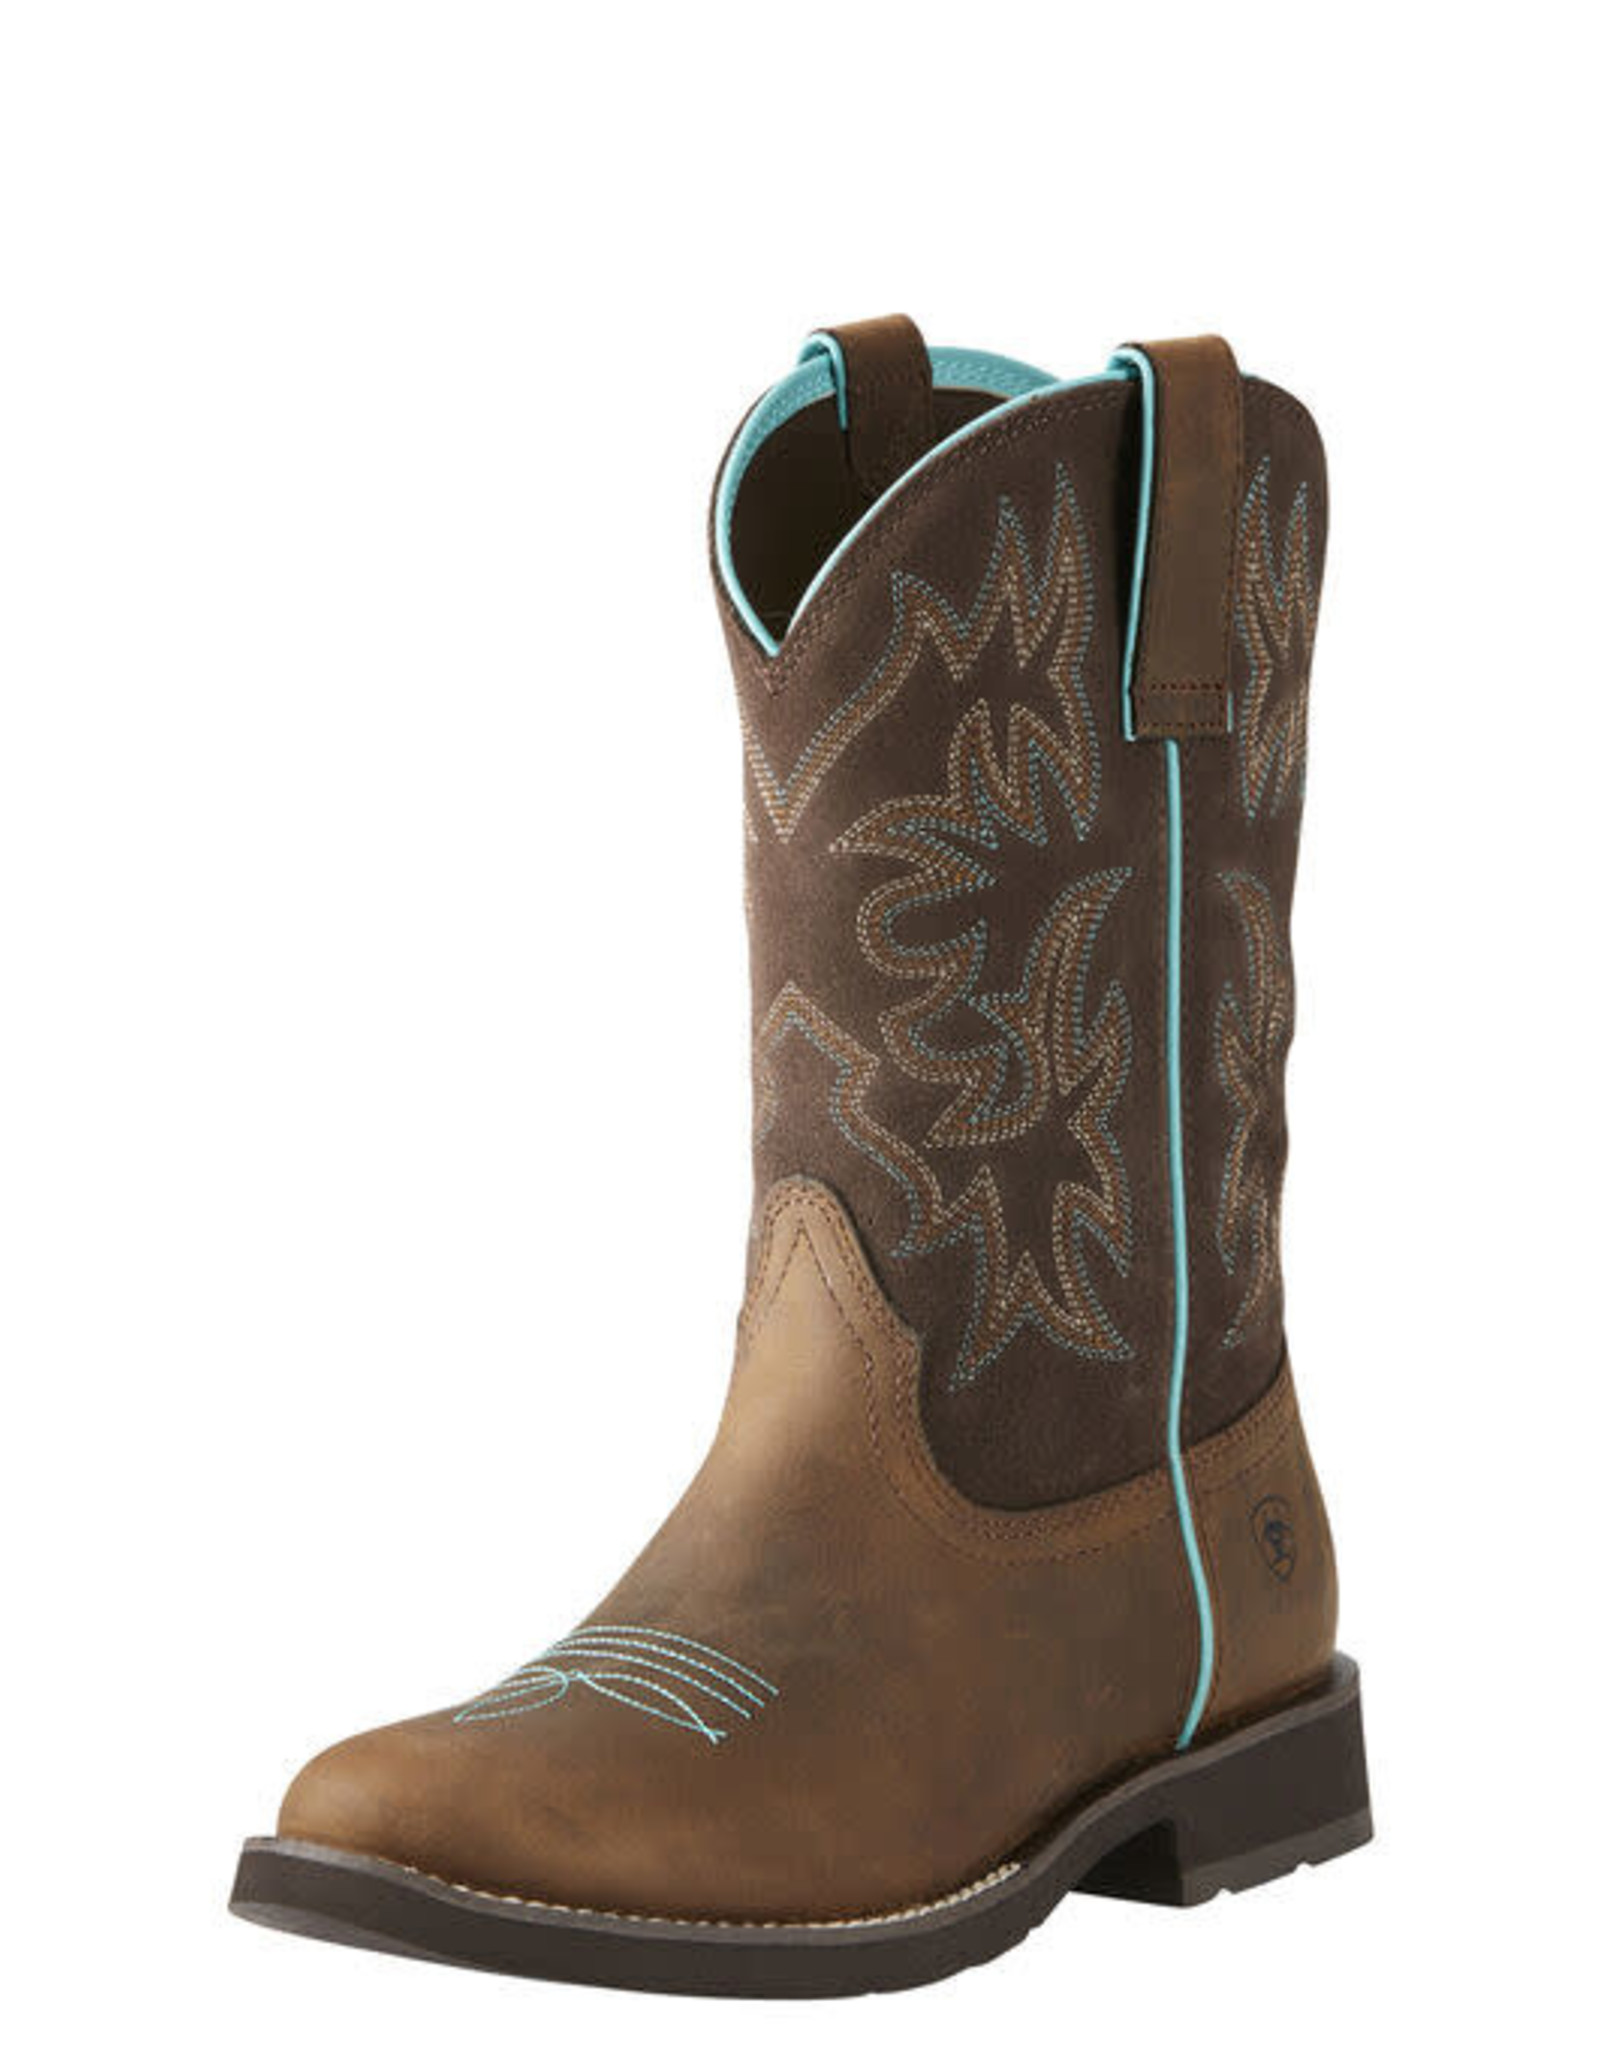 Ariat Womens Ariat Round Toe Distressed Delilah Cowboy Boot